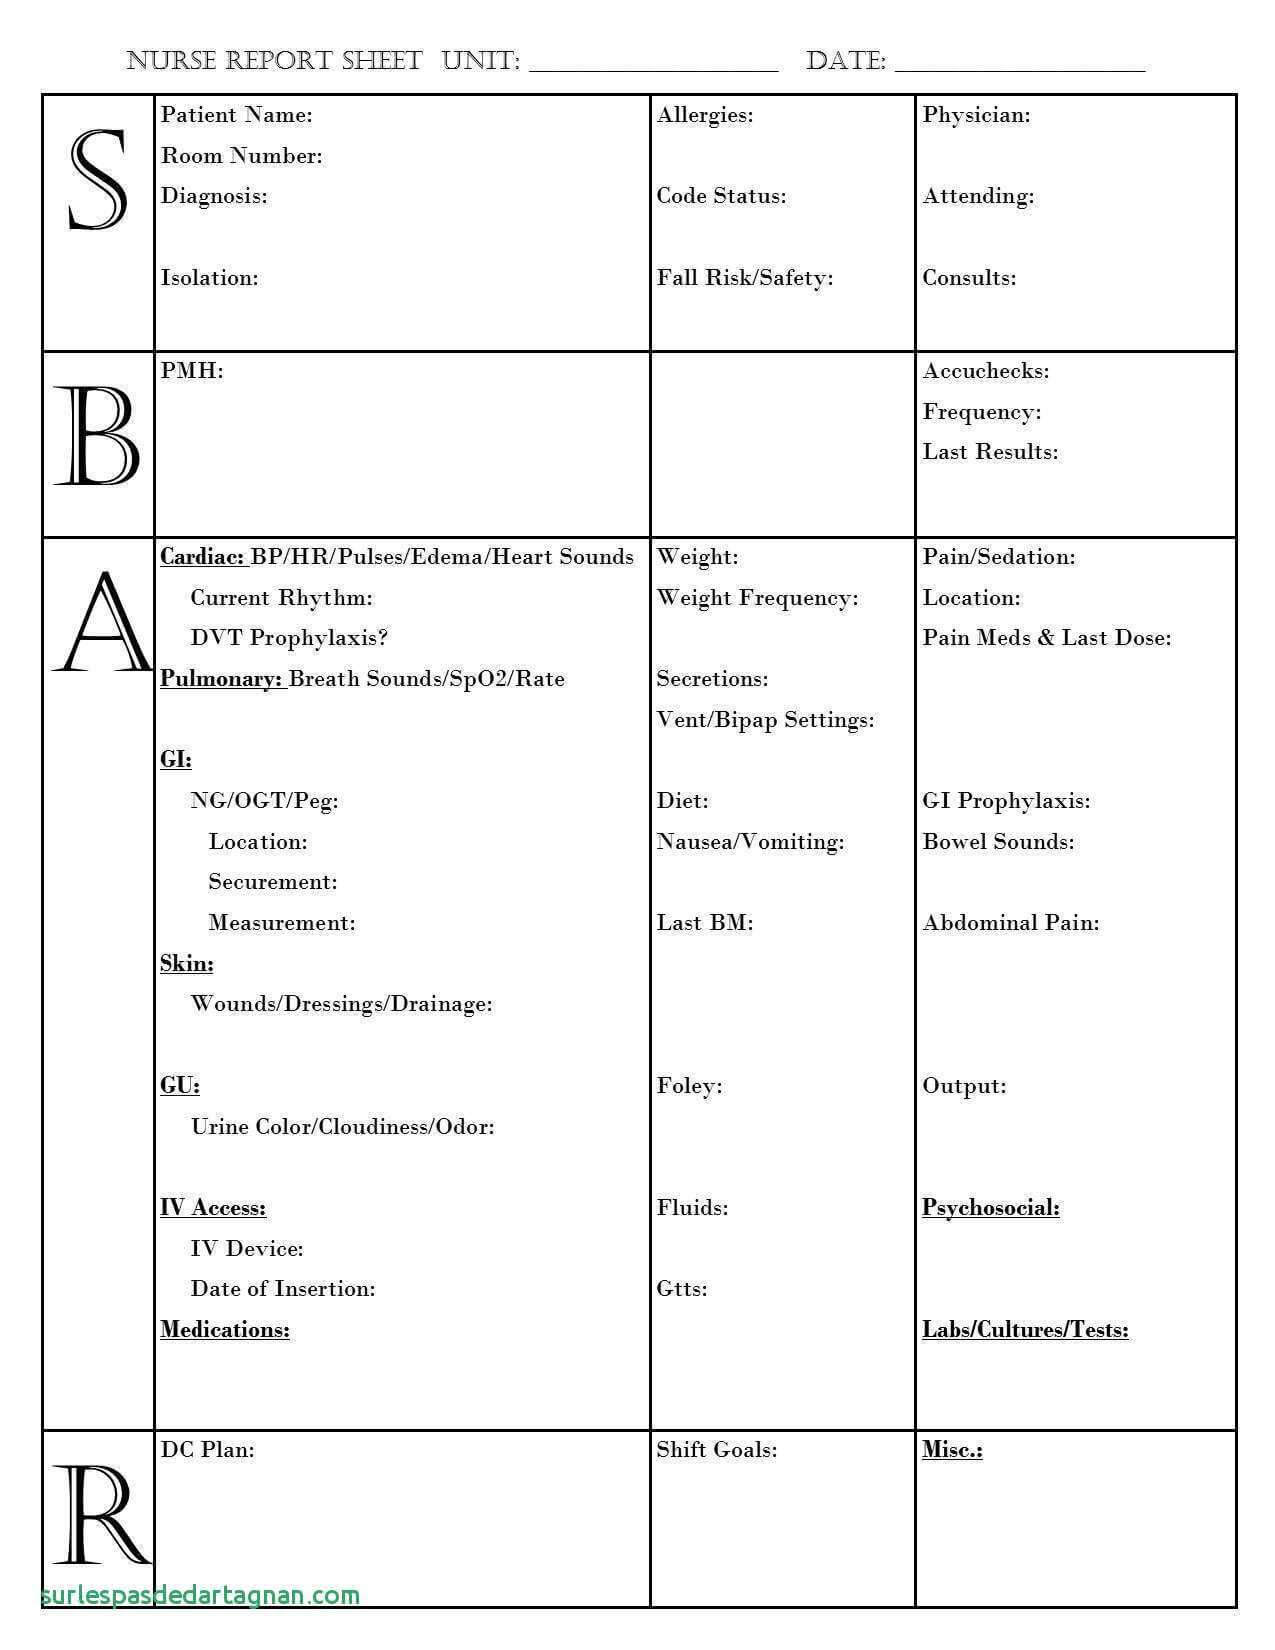 Nursing Report Sheet Template Together With Sbar Nurse Pertaining To Nurse Report Sheet Templates